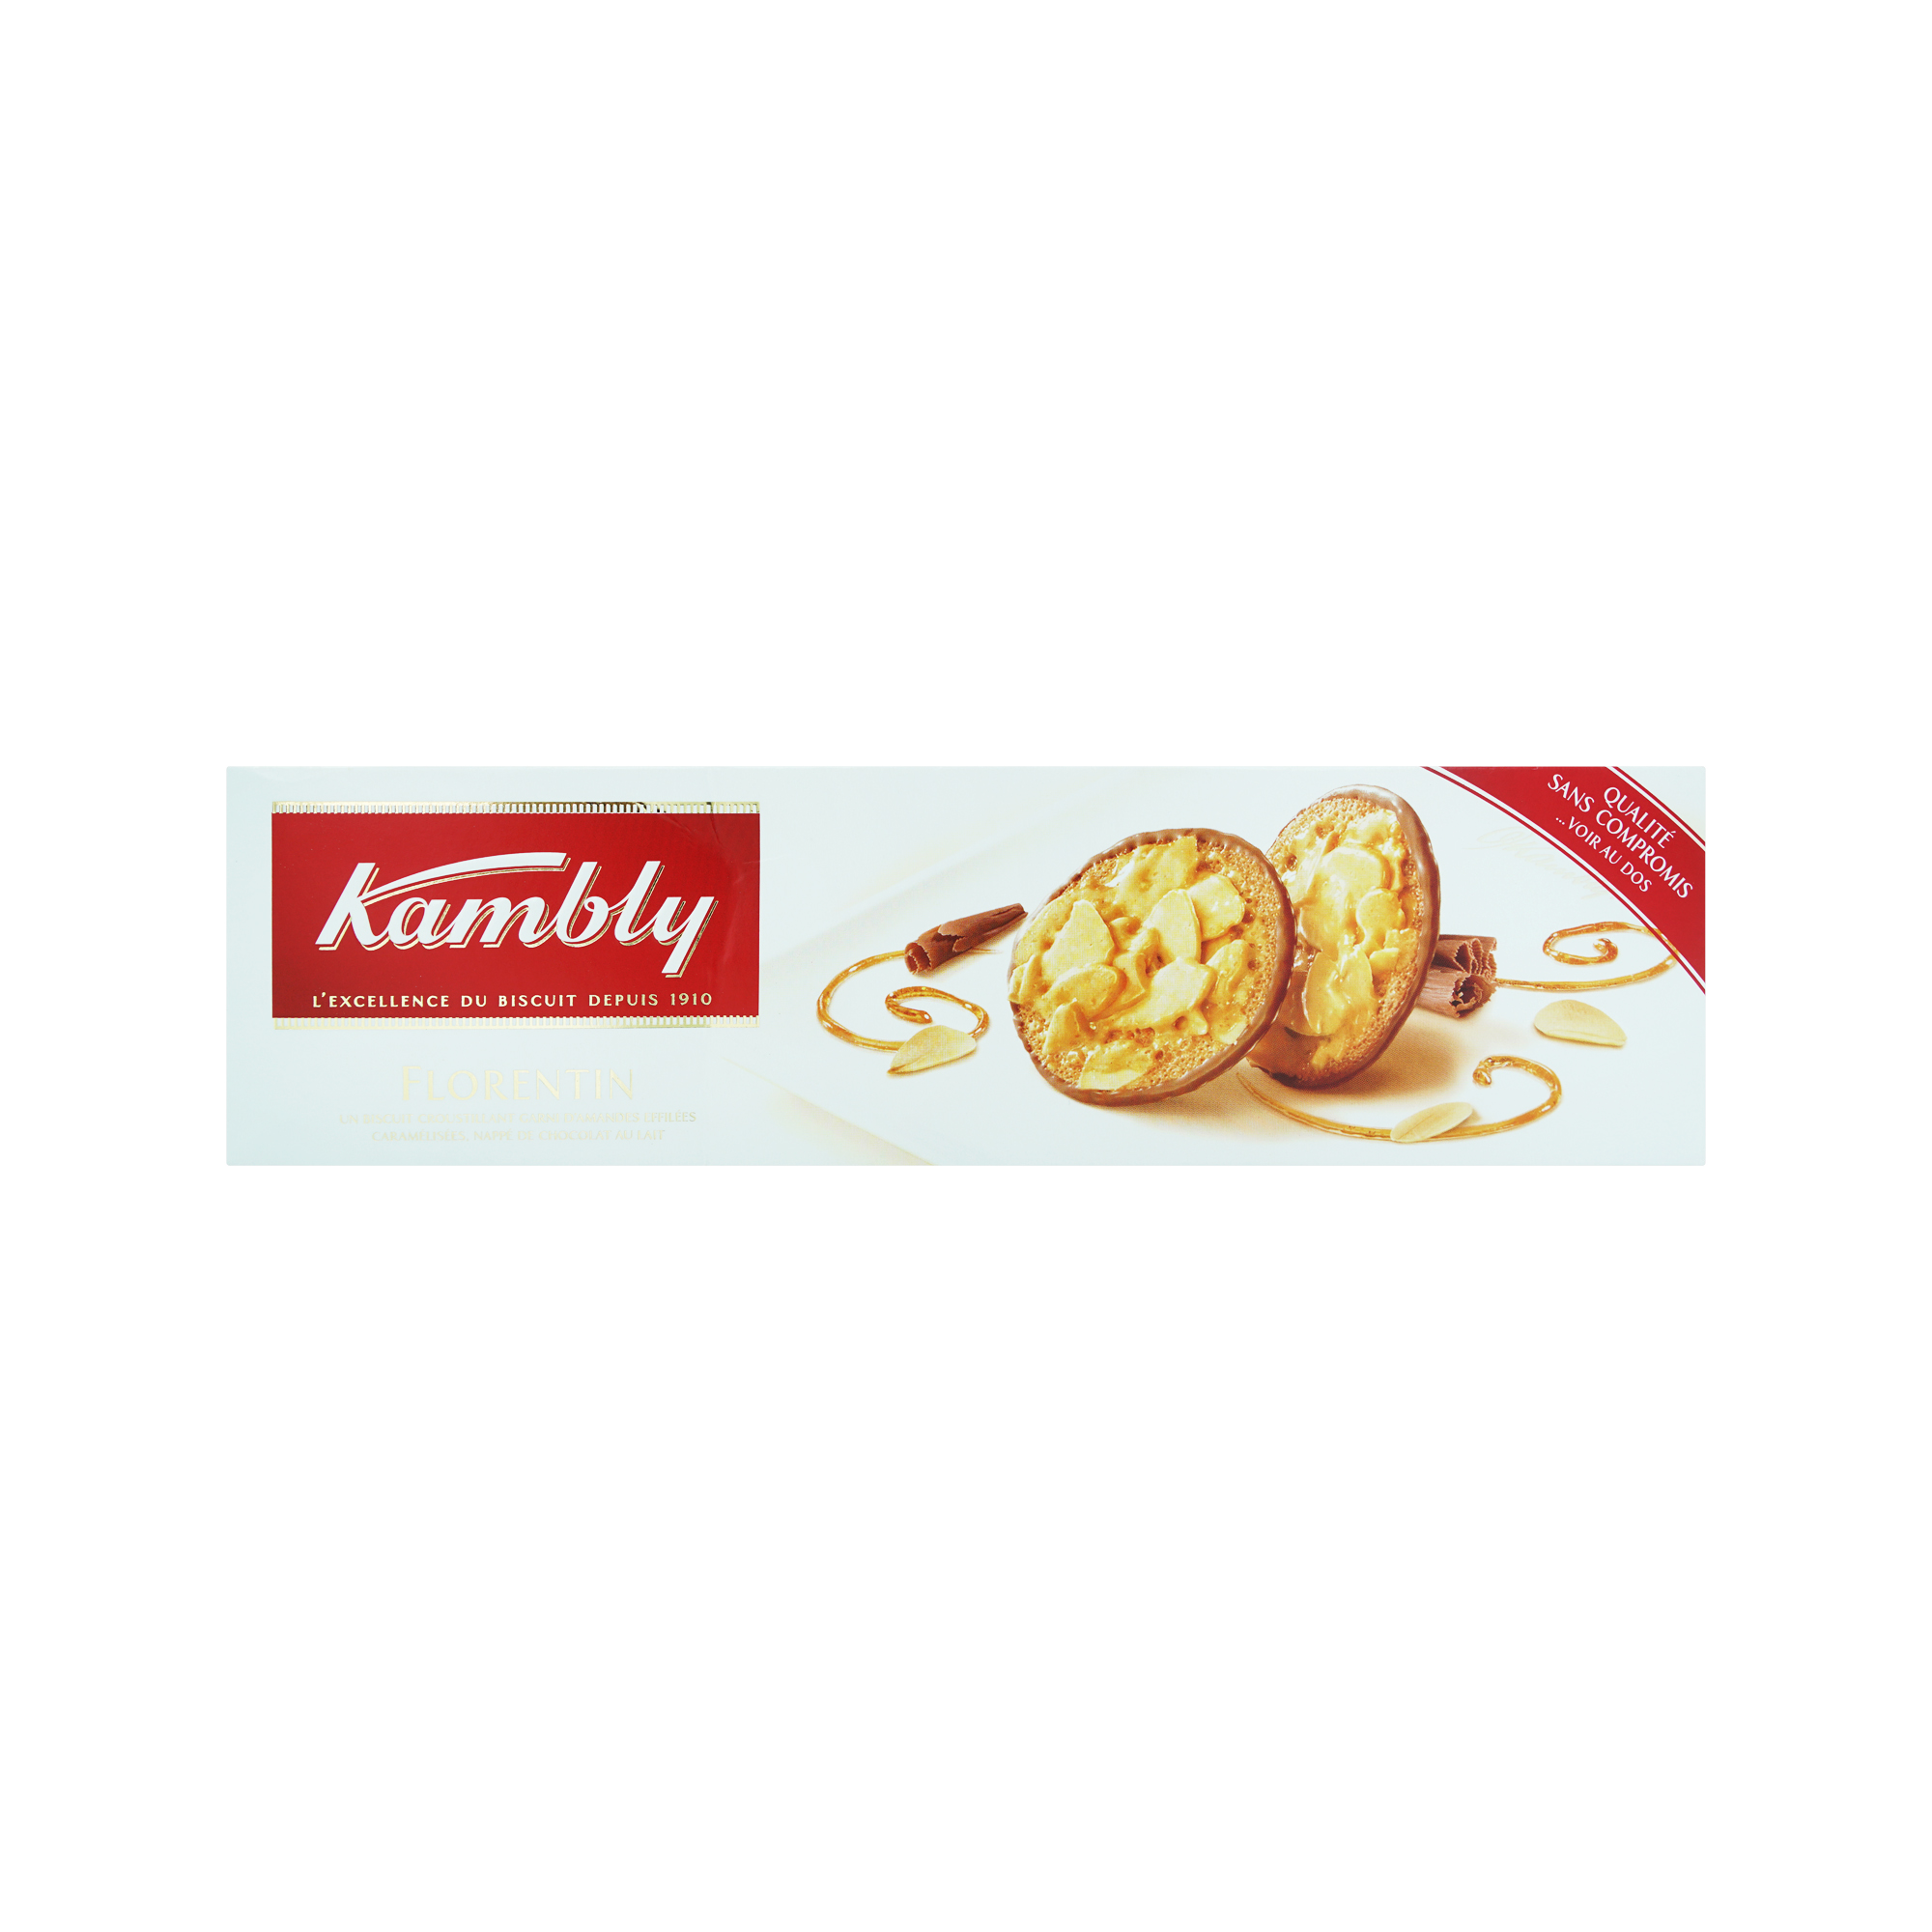 Kambly Florentine Biscuits (100g)